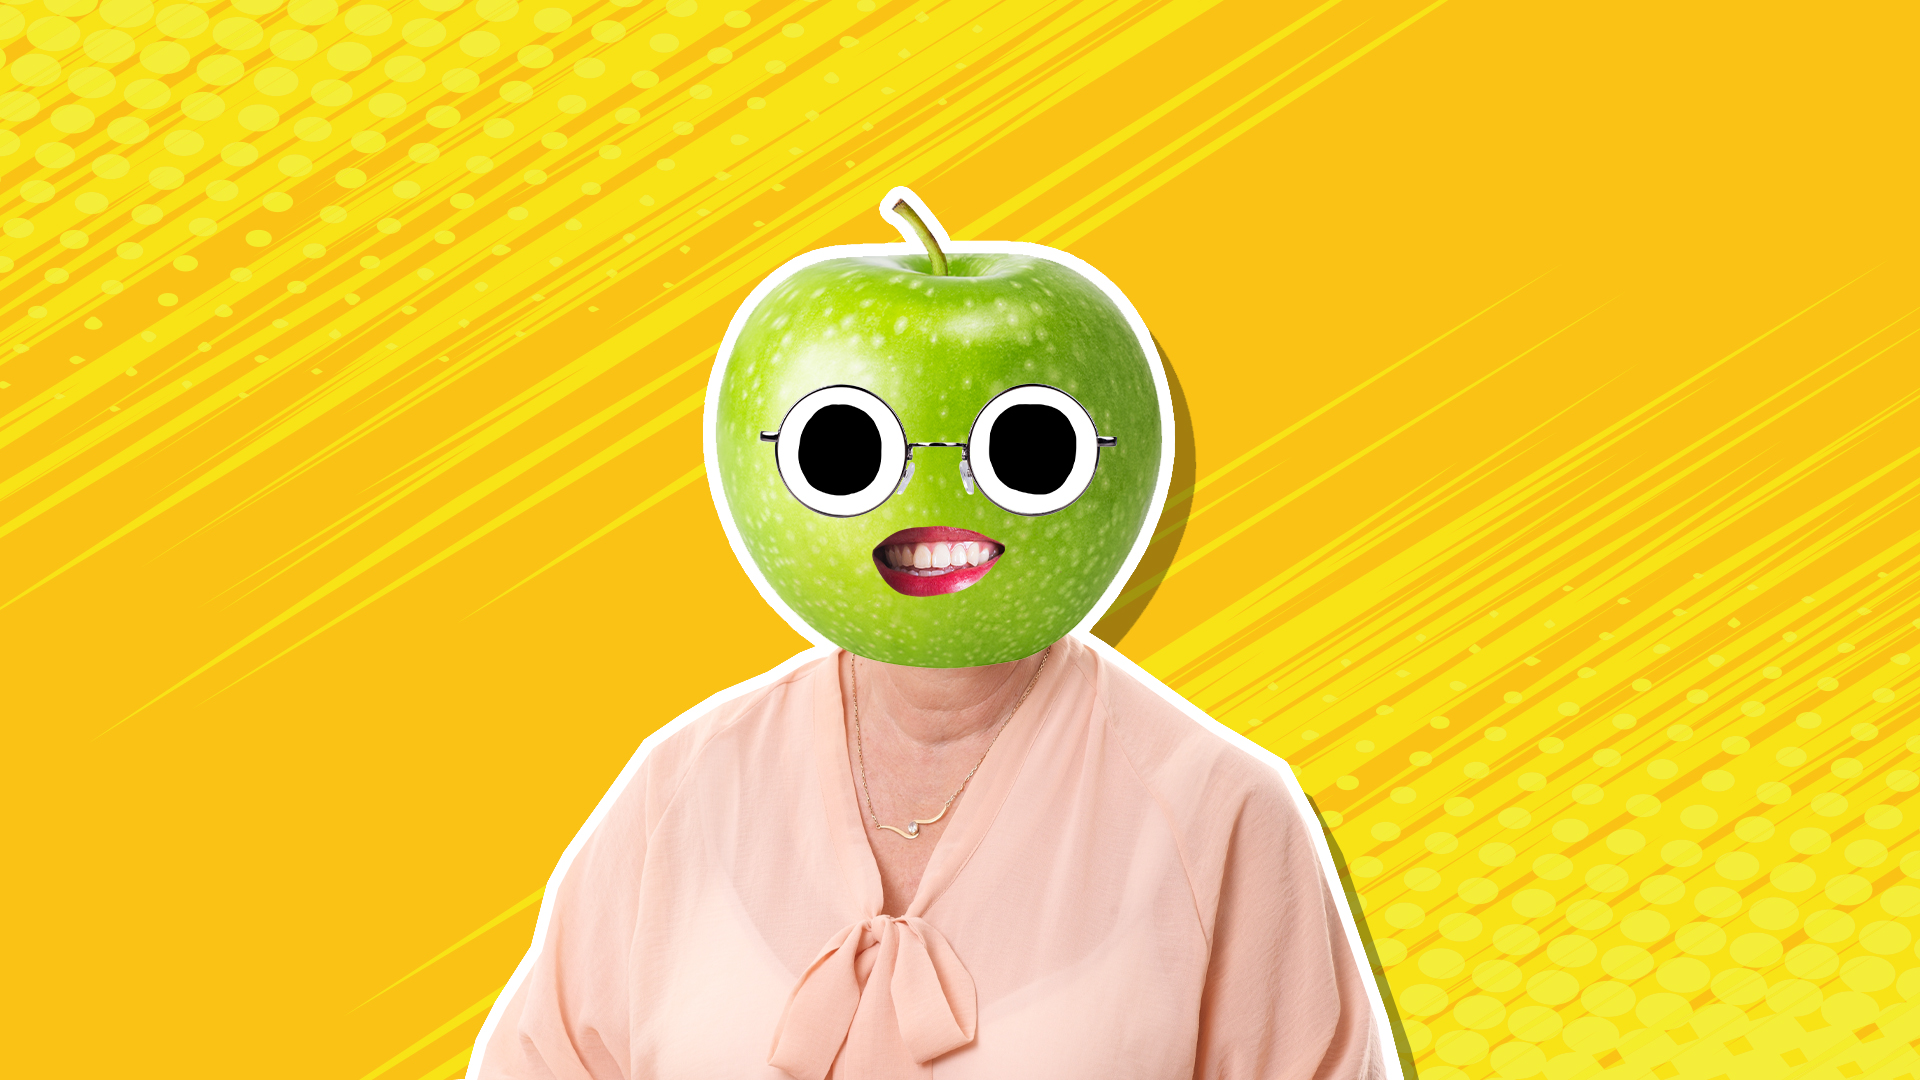 Classic Granny Smith Apple- {Funny Pic}  Funny vegetables, Funny fruit,  Food humor